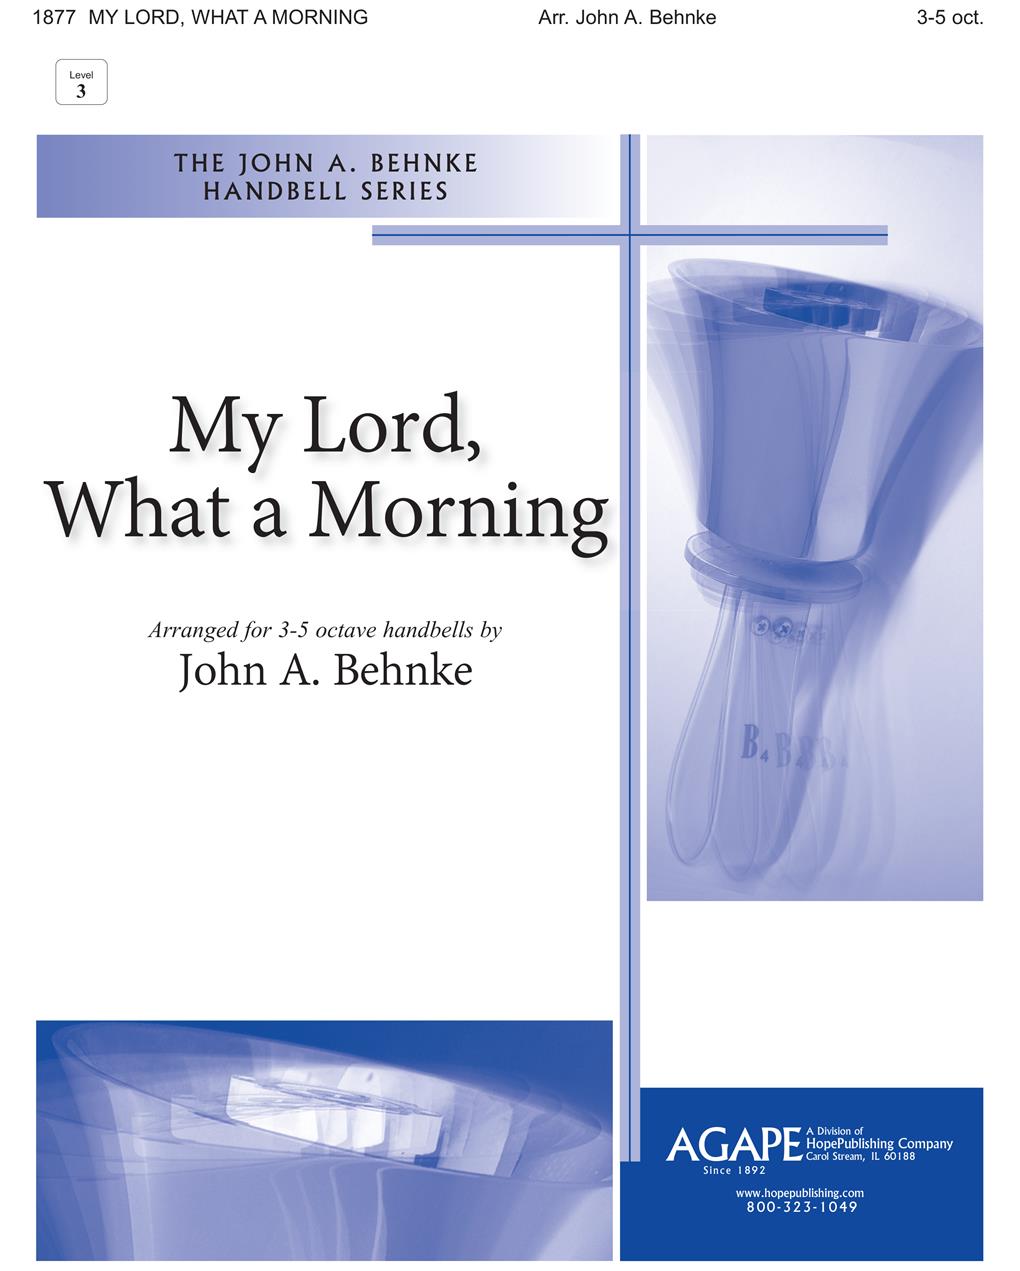 My Lord What a Morning - 3-5 Octaves Cover Image